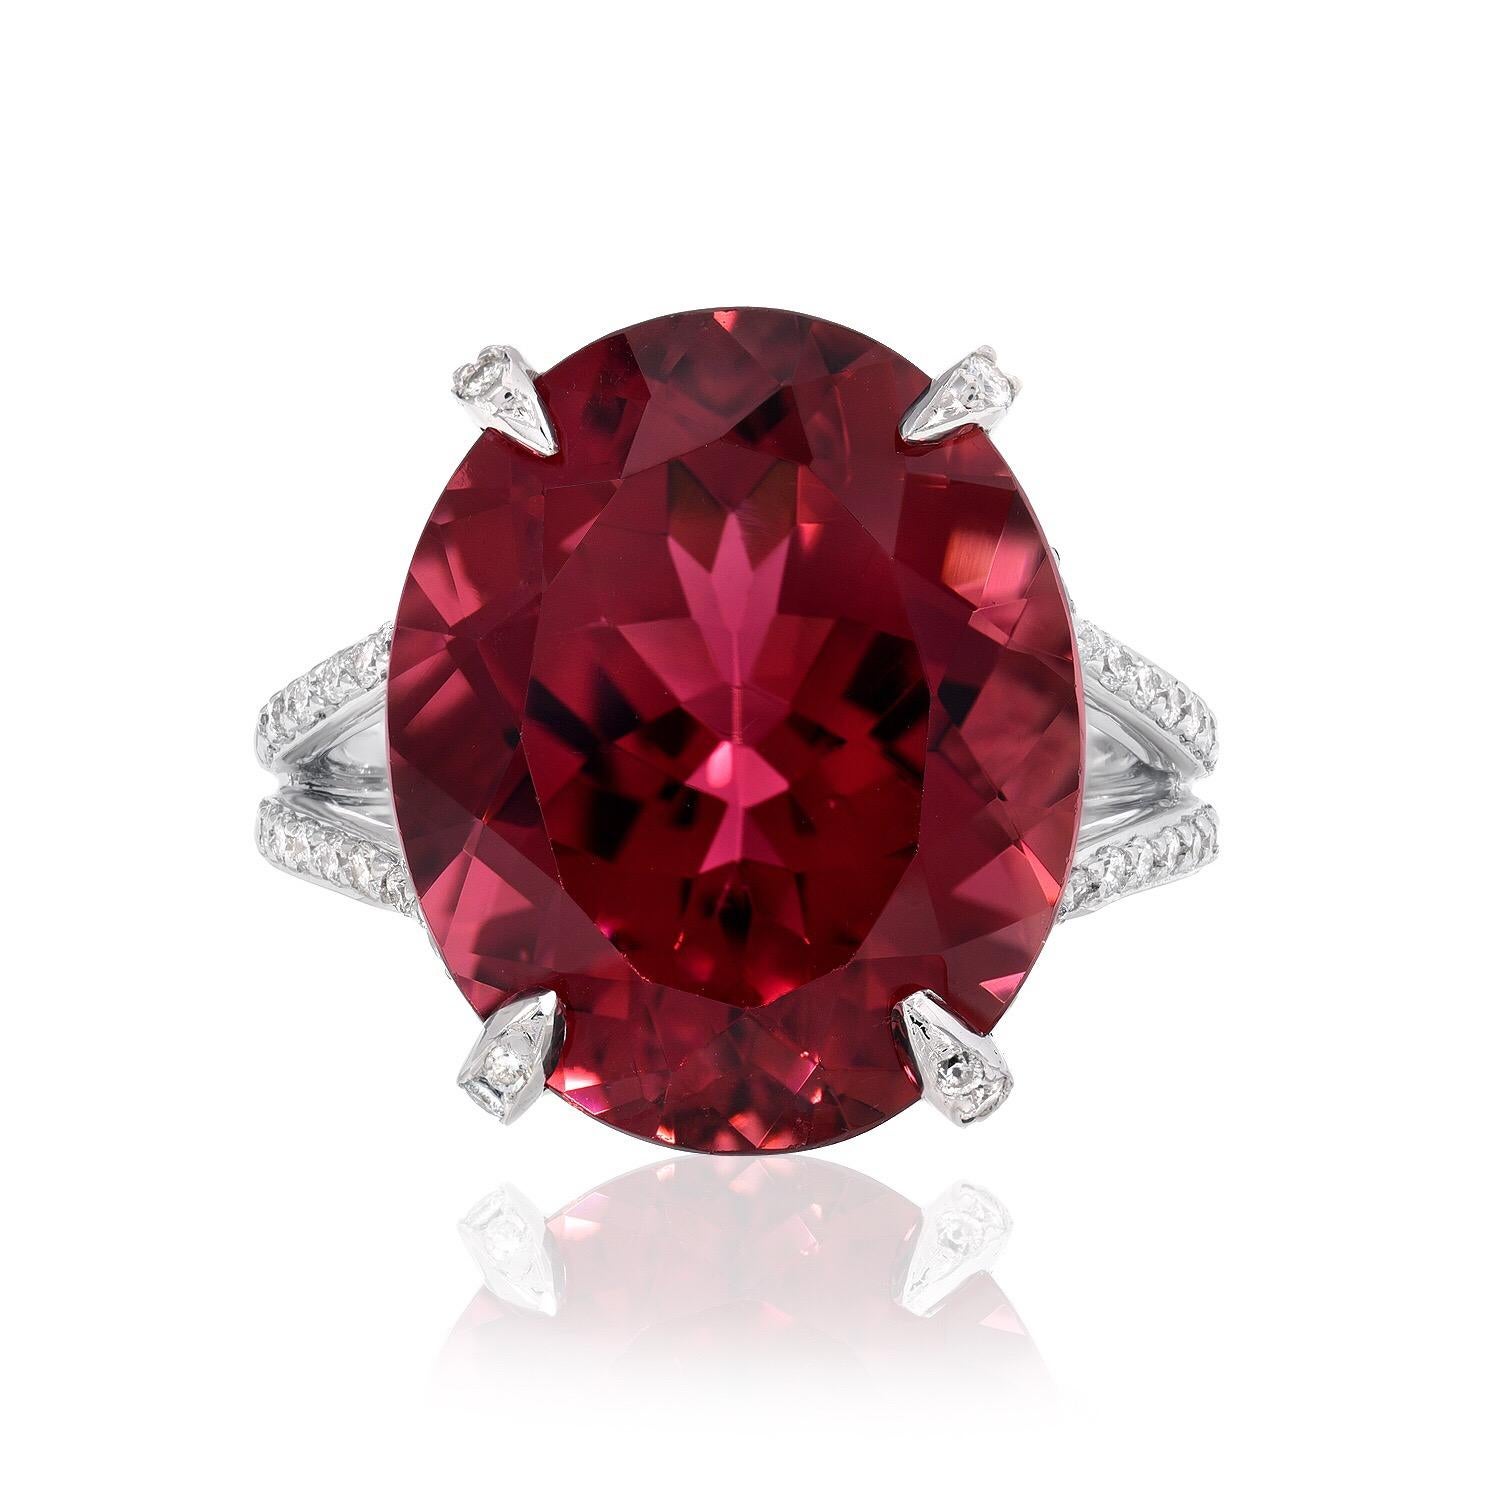 White gold diamond ring showcasing an intense oval Rubellite Tourmaline, weighing a total of 11.90 carats, set in a 0.88 carats total micro pave, 18K white gold diamond ring.
Size 6.5. Resizing is complimentary upon request.
Returns are accepted and